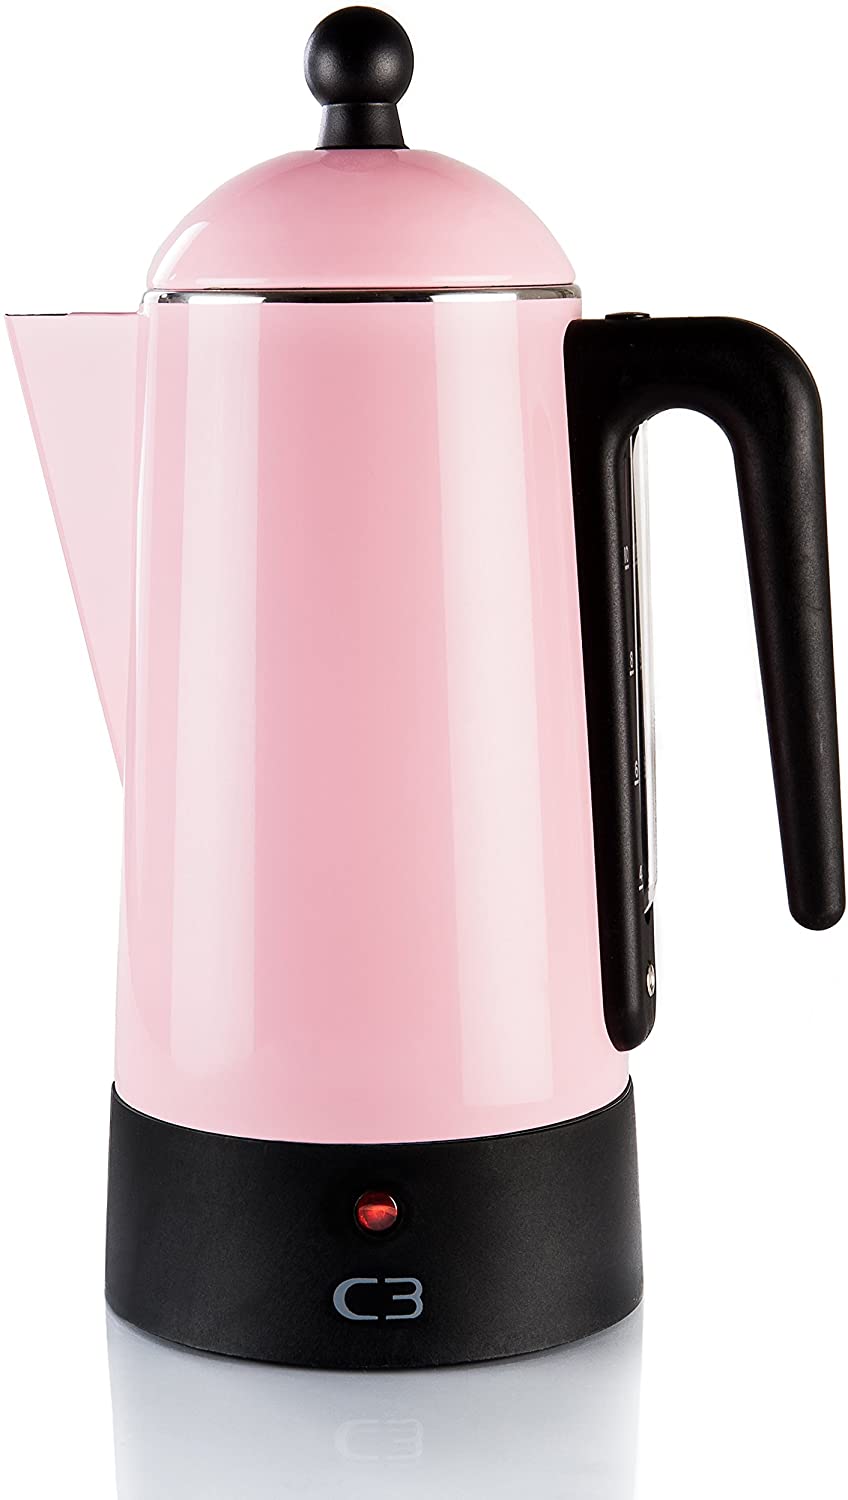 C3 30-30207 Design Percolator 4 - 10 Cups, Painted Stainless Steel, Pink